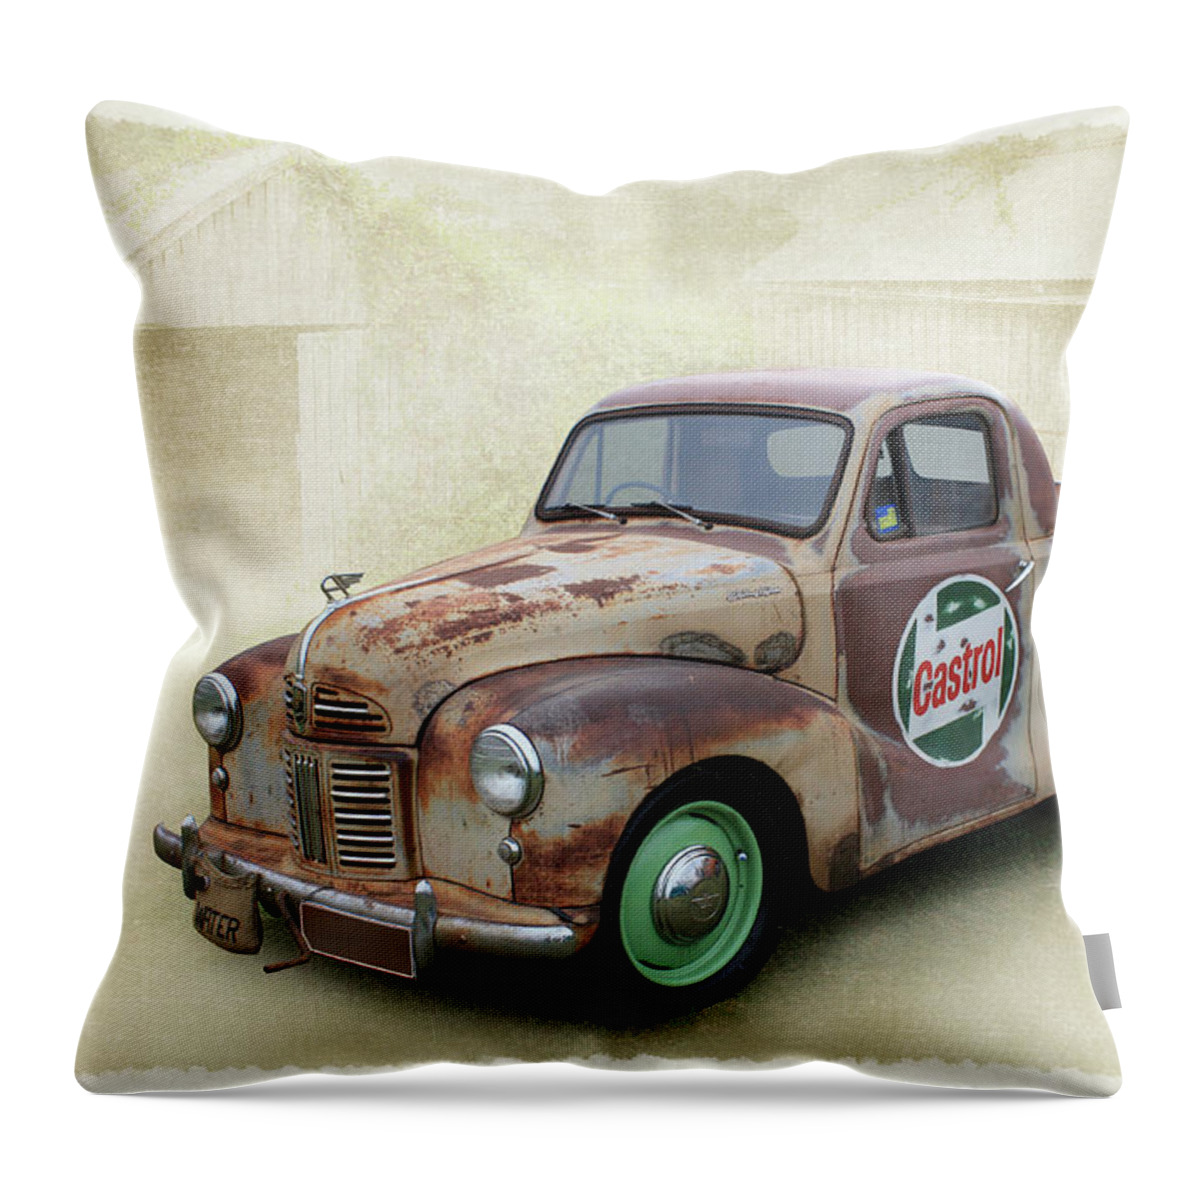 Automotive Throw Pillow featuring the photograph Austin Ute by Keith Hawley